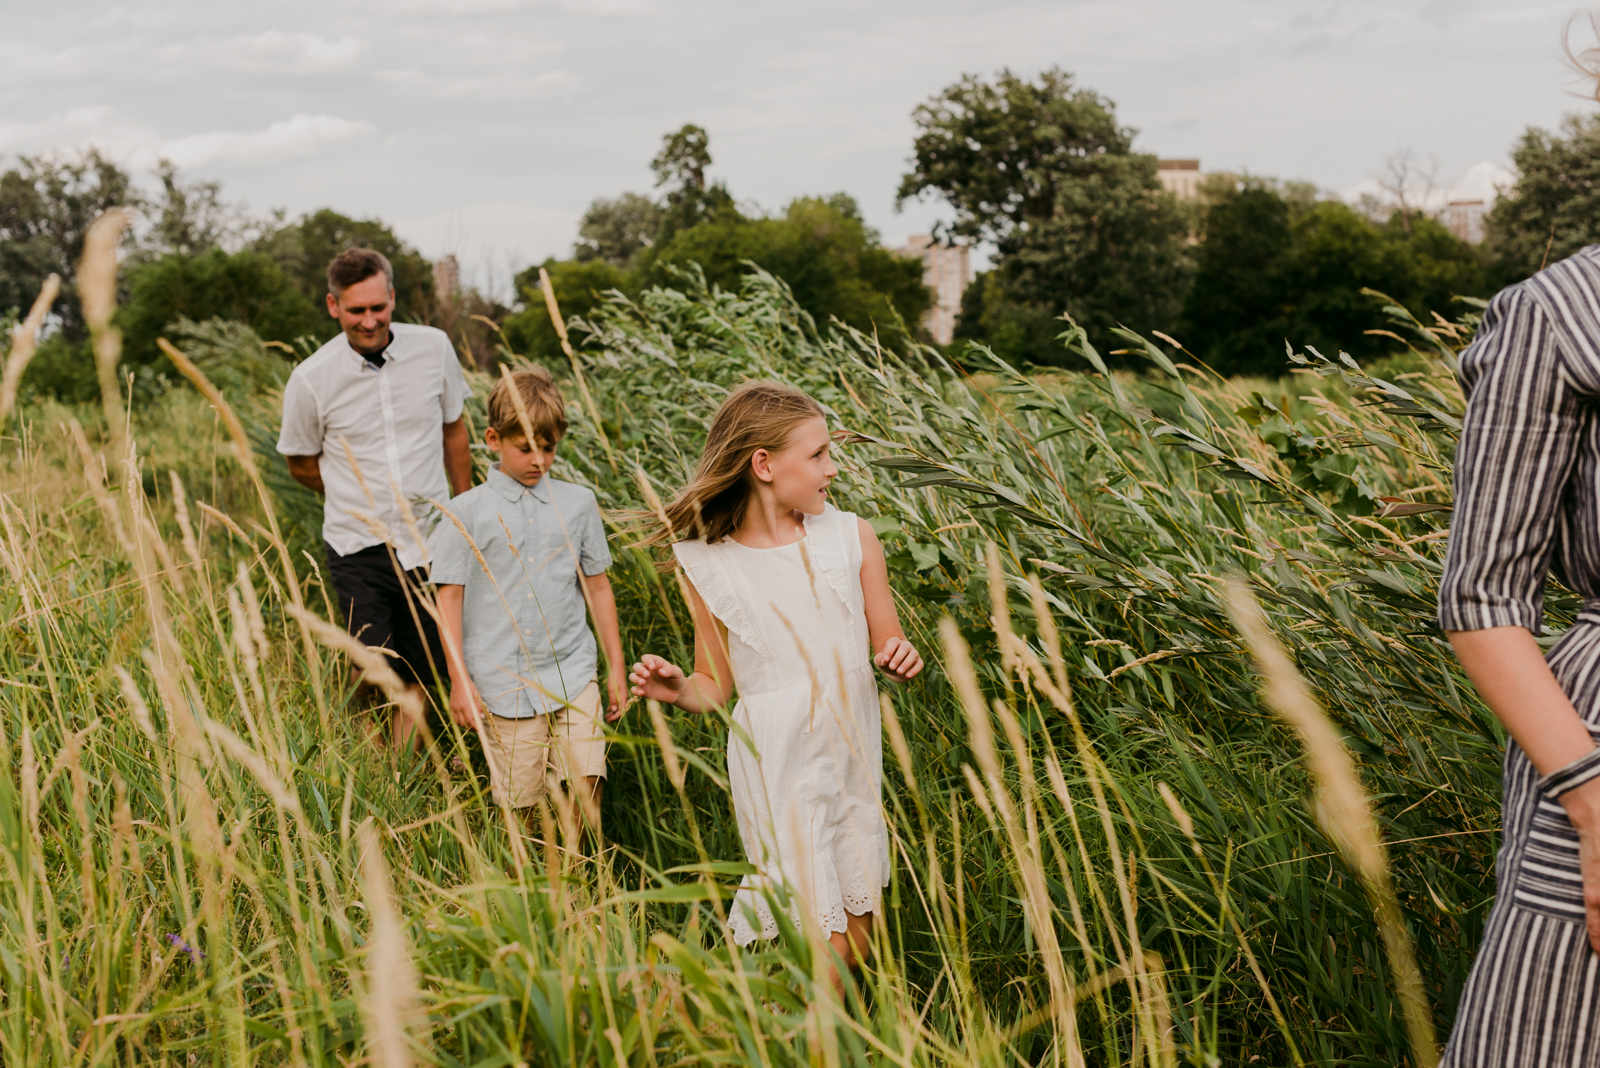 family walking through the tall grass in a park